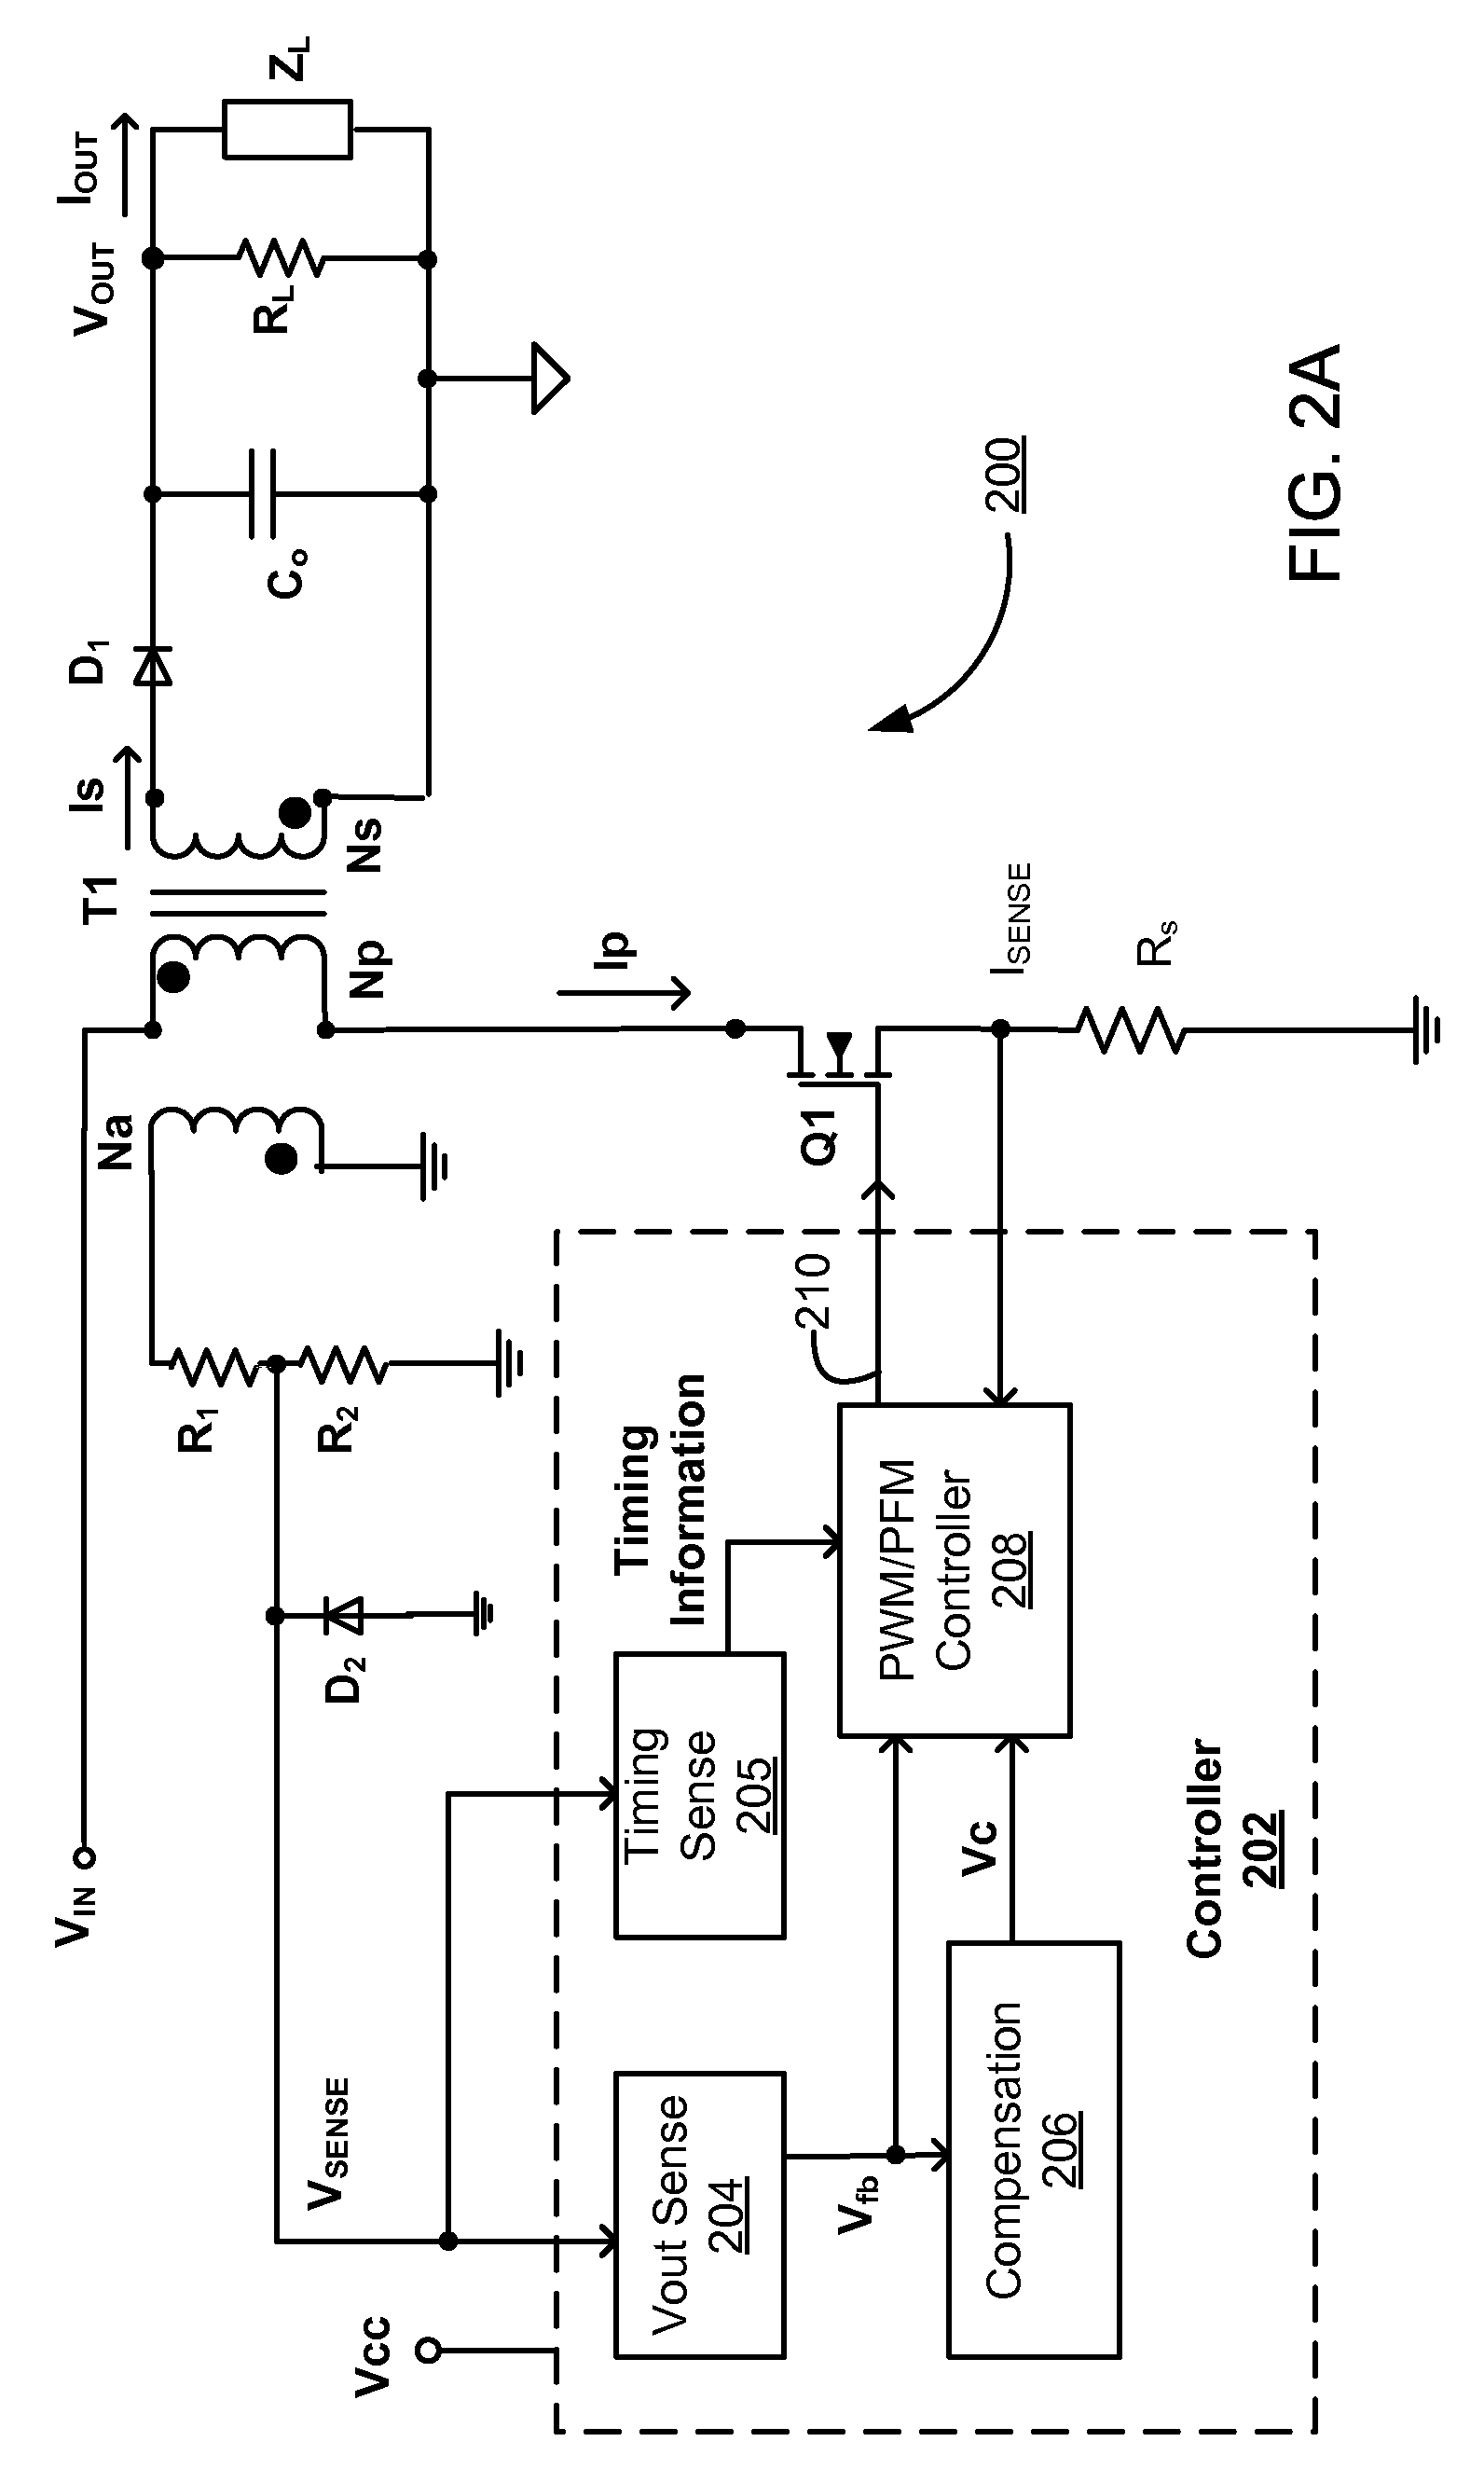 Adaptive control for transition between multiple modulation modes in a switching power converter